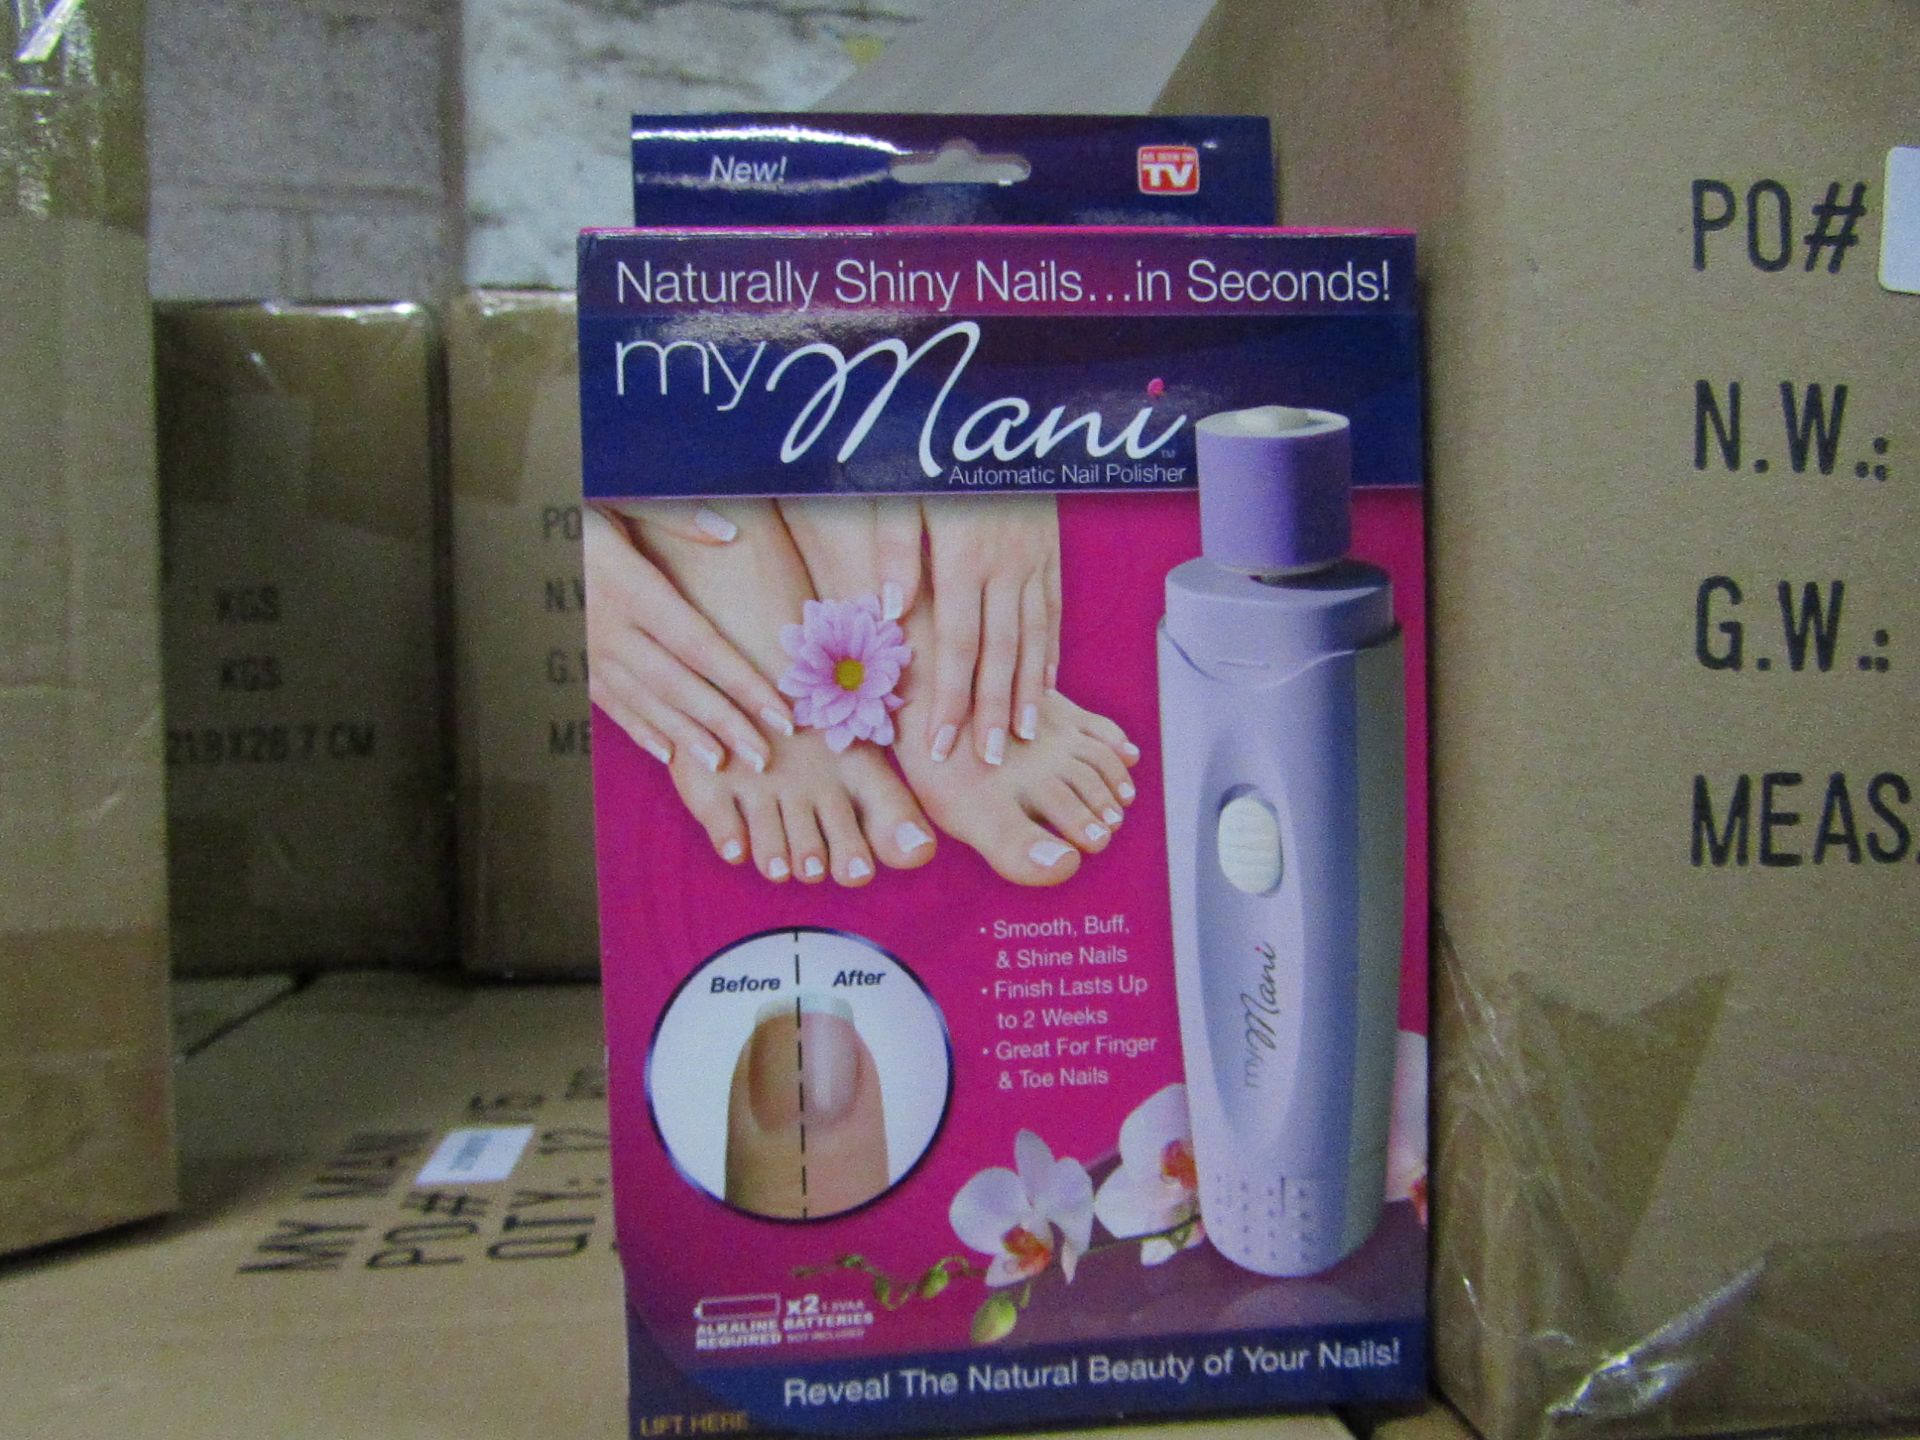 2X My Mani automatic nail polisher, new and boxed.